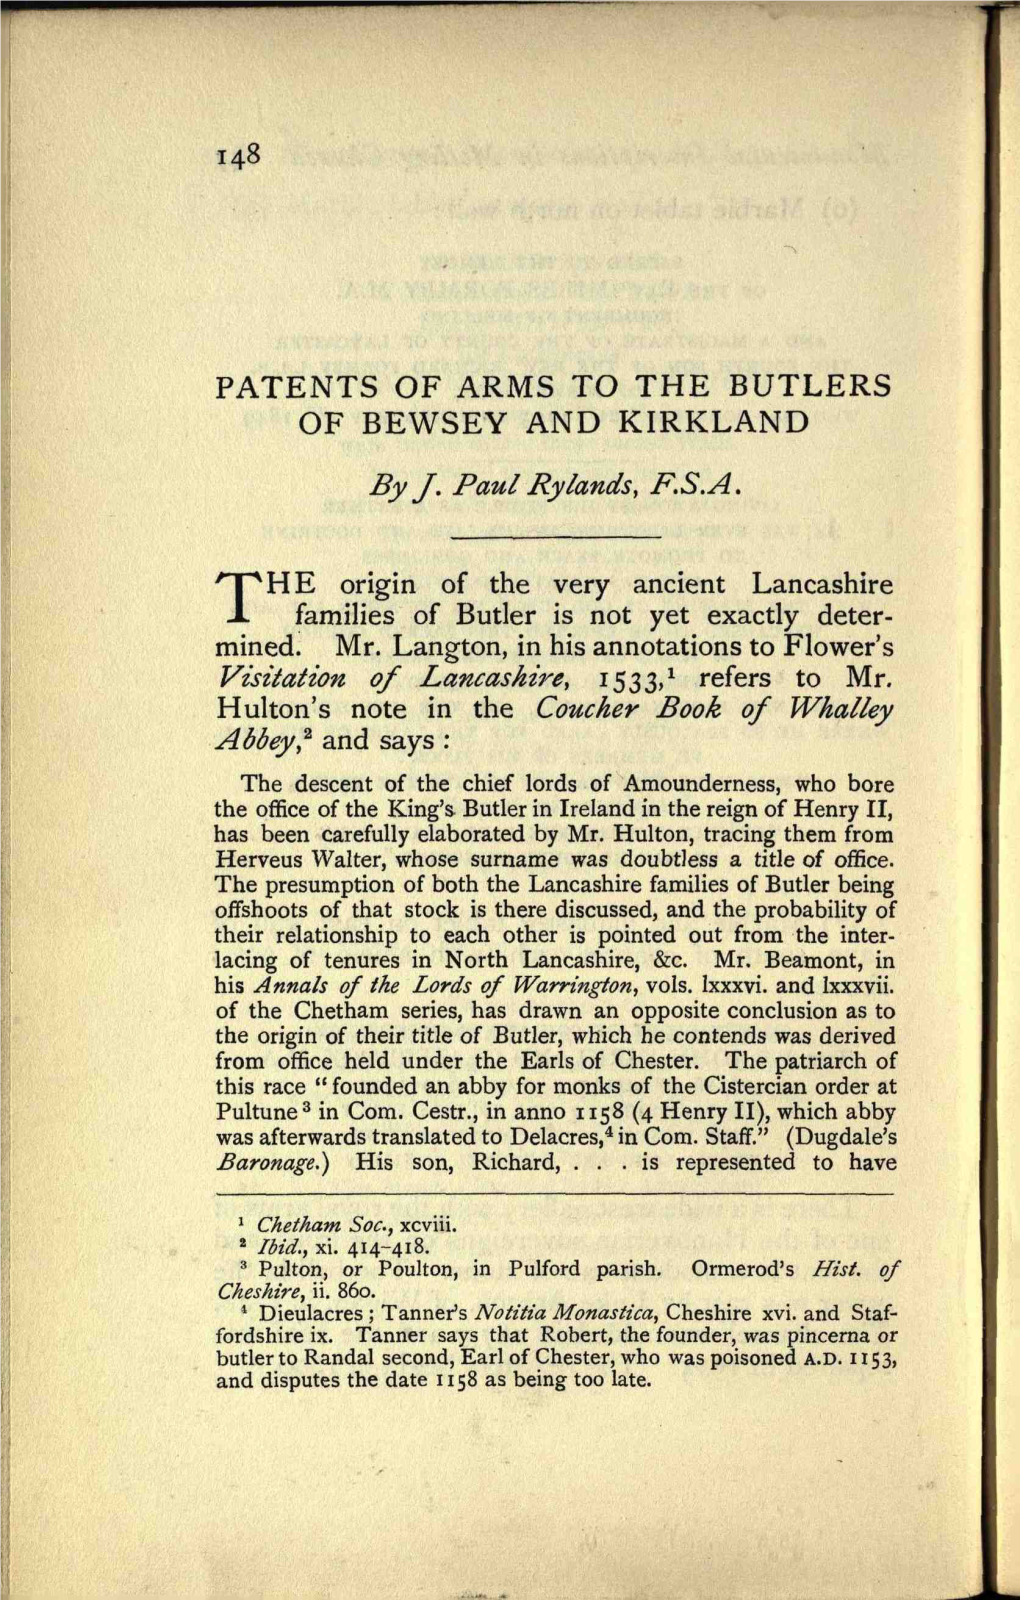 PATENTS of ARMS to the BUTLERS of BEWSEY and KIRKLAND Byj.Paulrylands,F.S.A